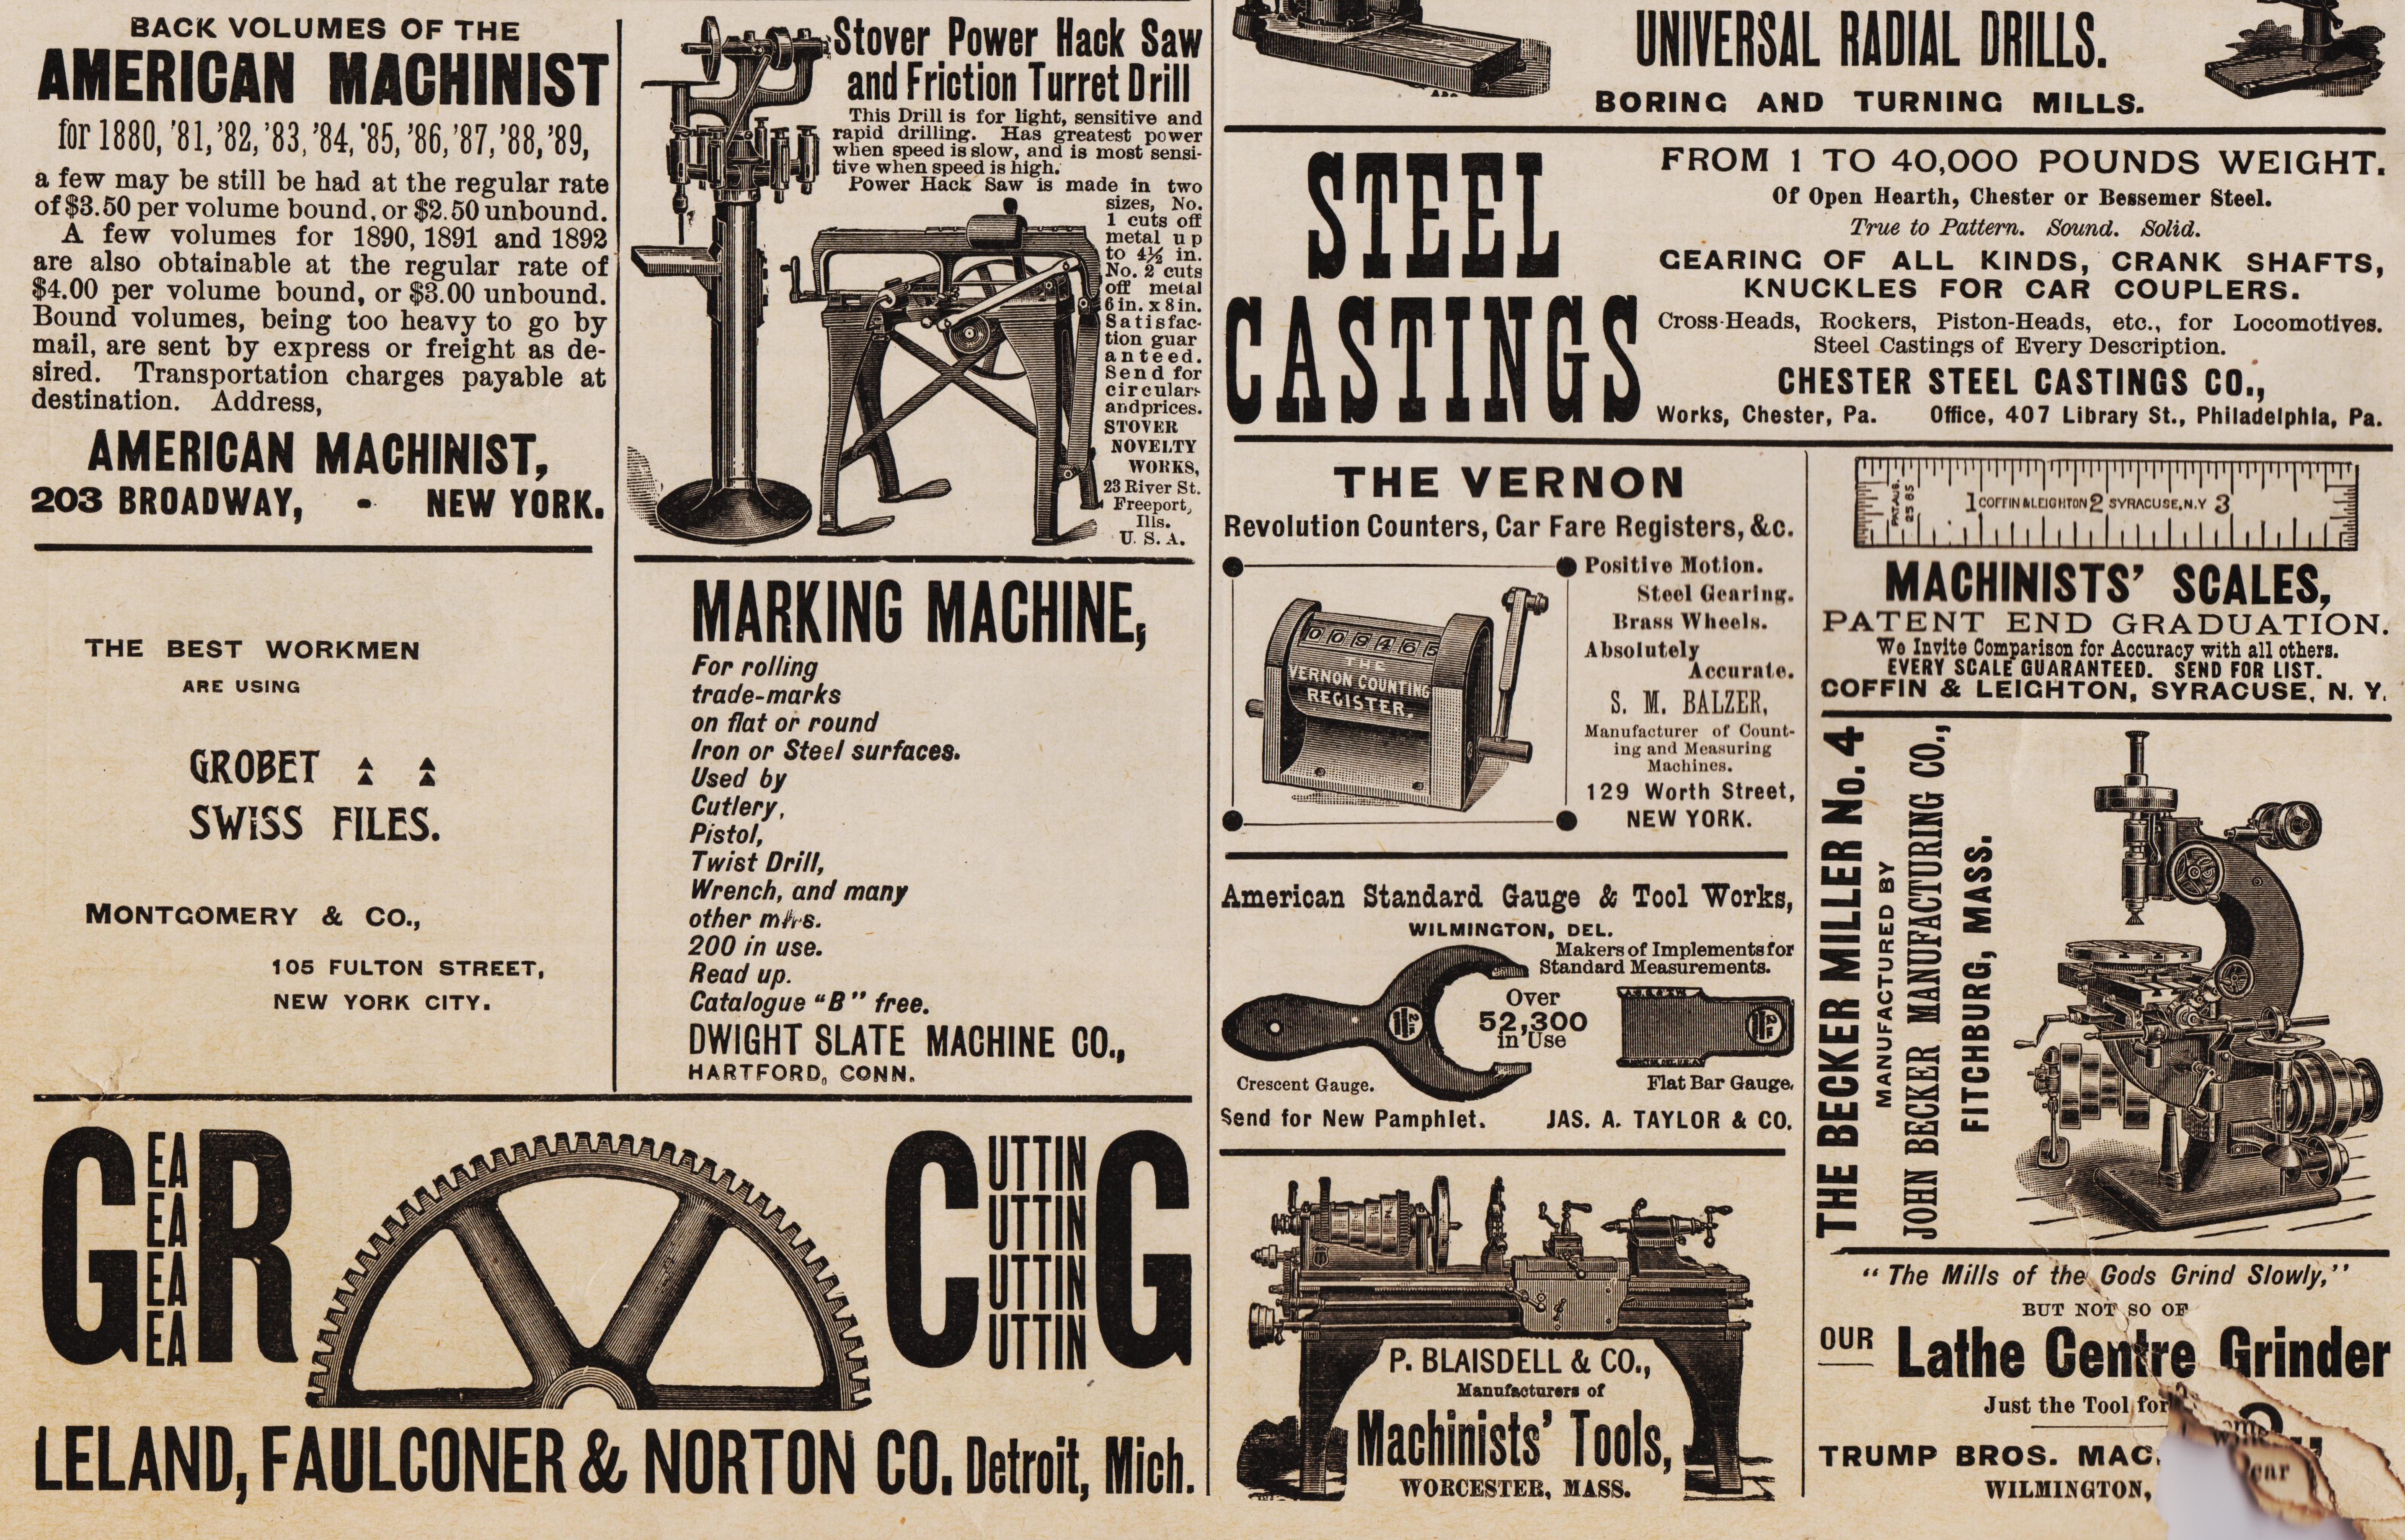 https://antiquemachinery.com/images-2020/American_Machinist-March-15-1894-page-16-bot-Ads.jpg